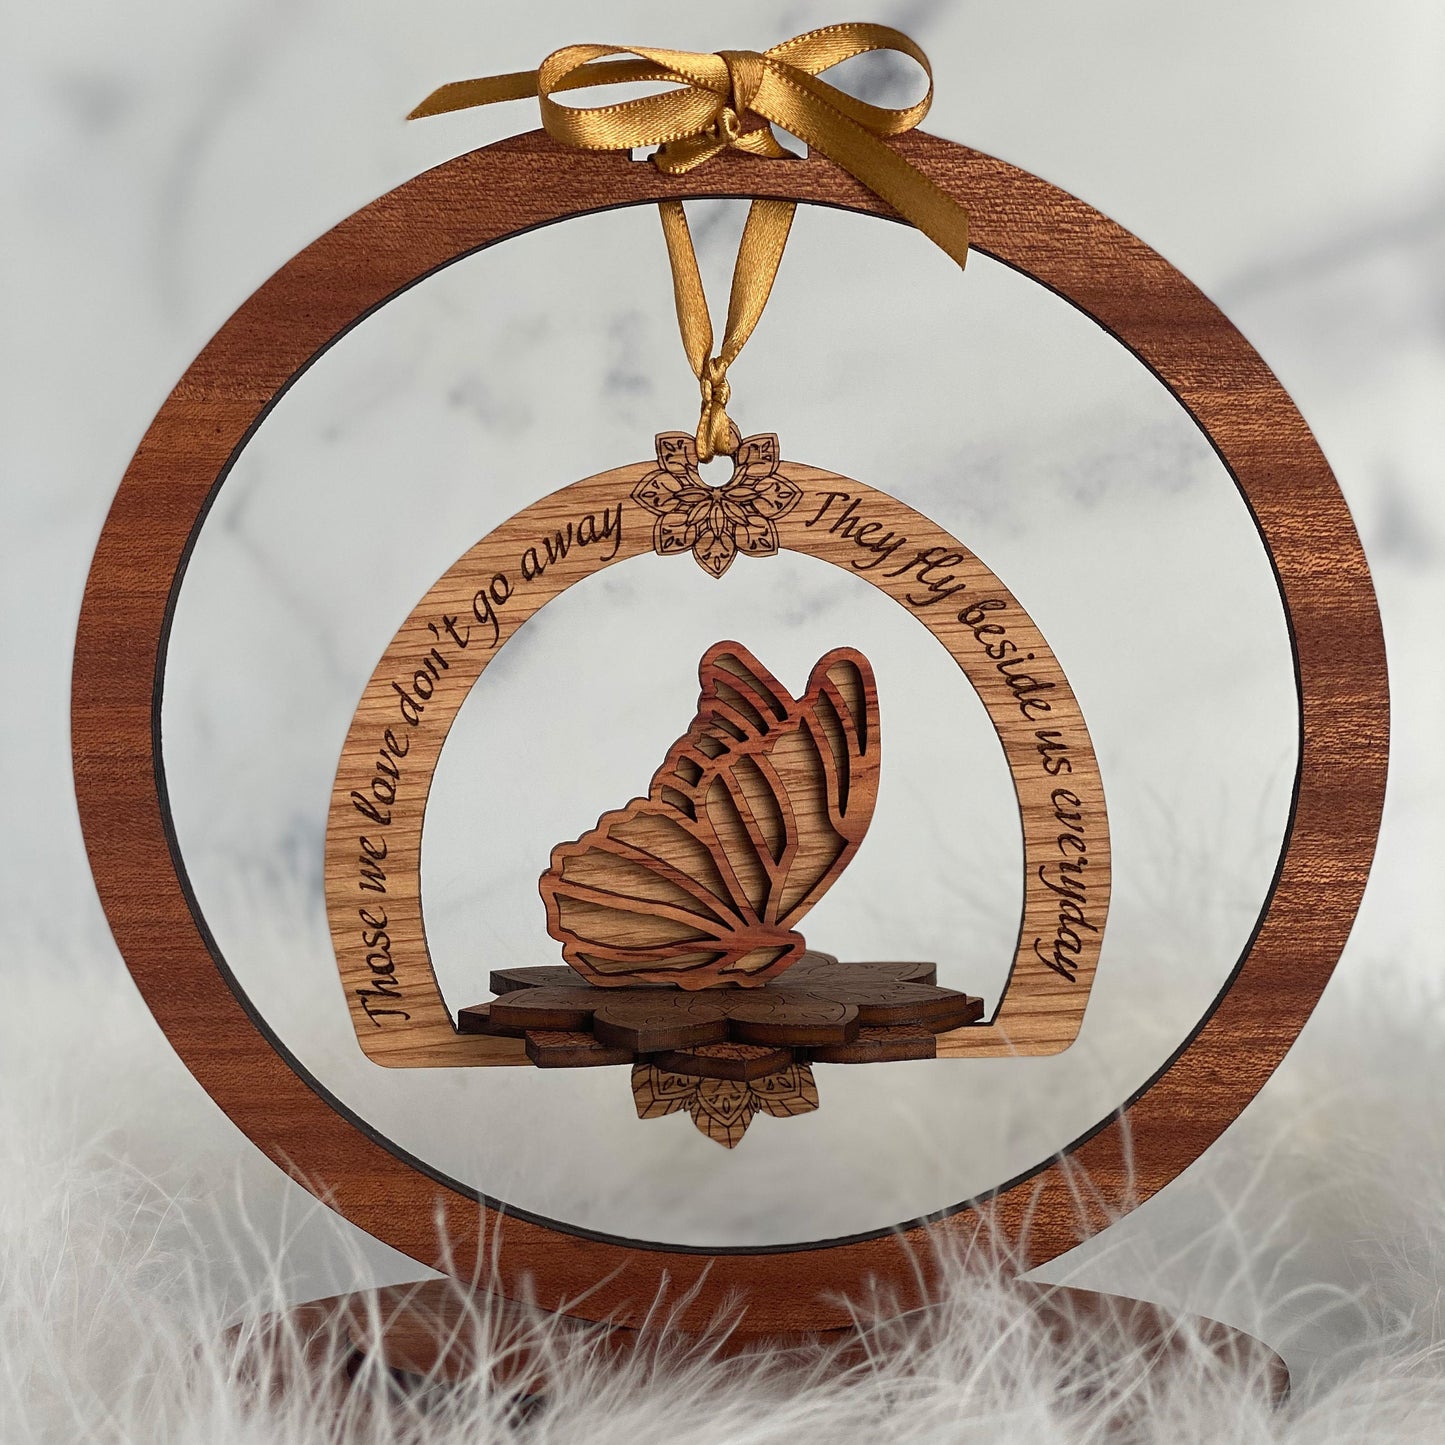 Personalized memorial remembrance display ornament INCLUDES stand, sympathy gift, butterfly, loss of loved one, designed for year round display.